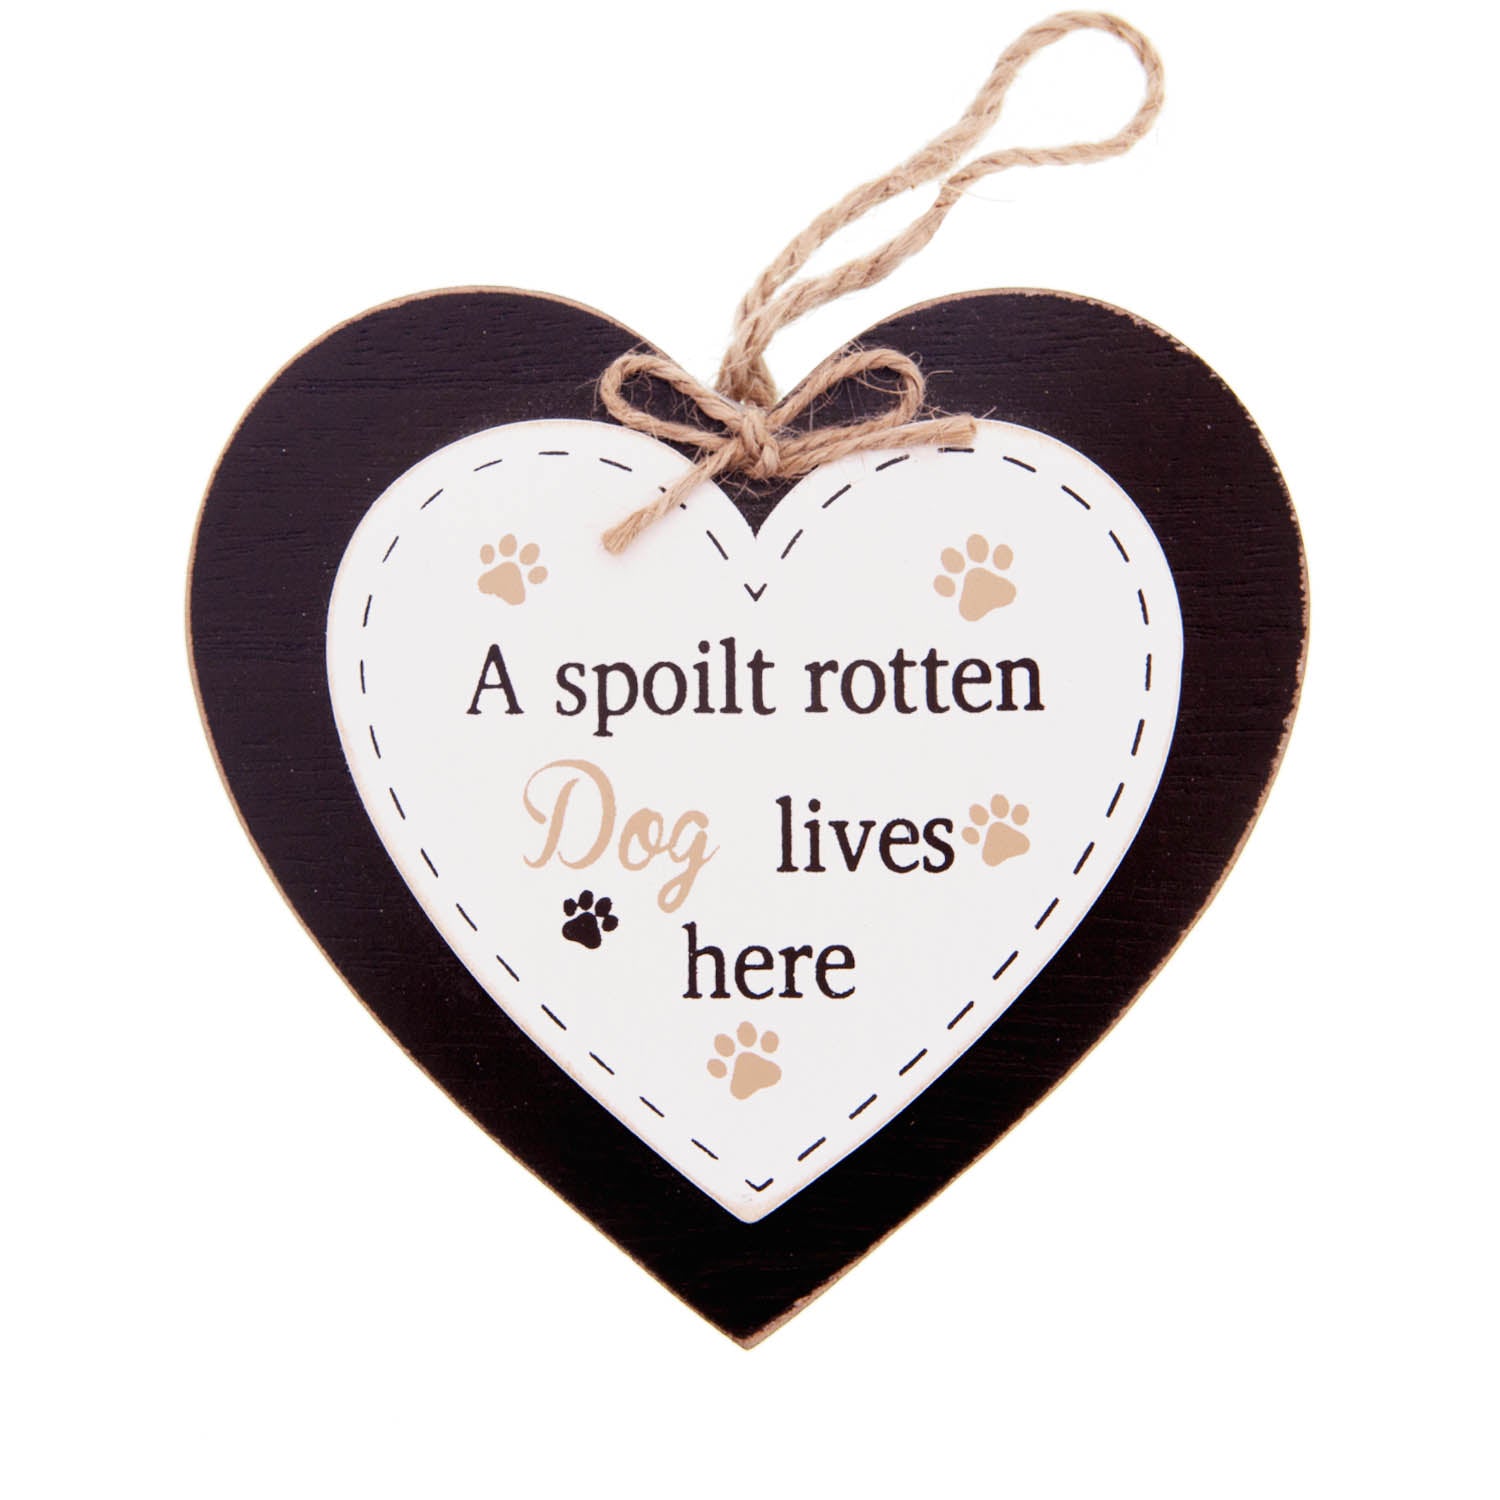 DogKrazyGifts - Doggie Pals Hanging Heart - A spoilt rotten Dog lives here - part of the range of Dog Themed Signs available from Dog Krazy Gifts